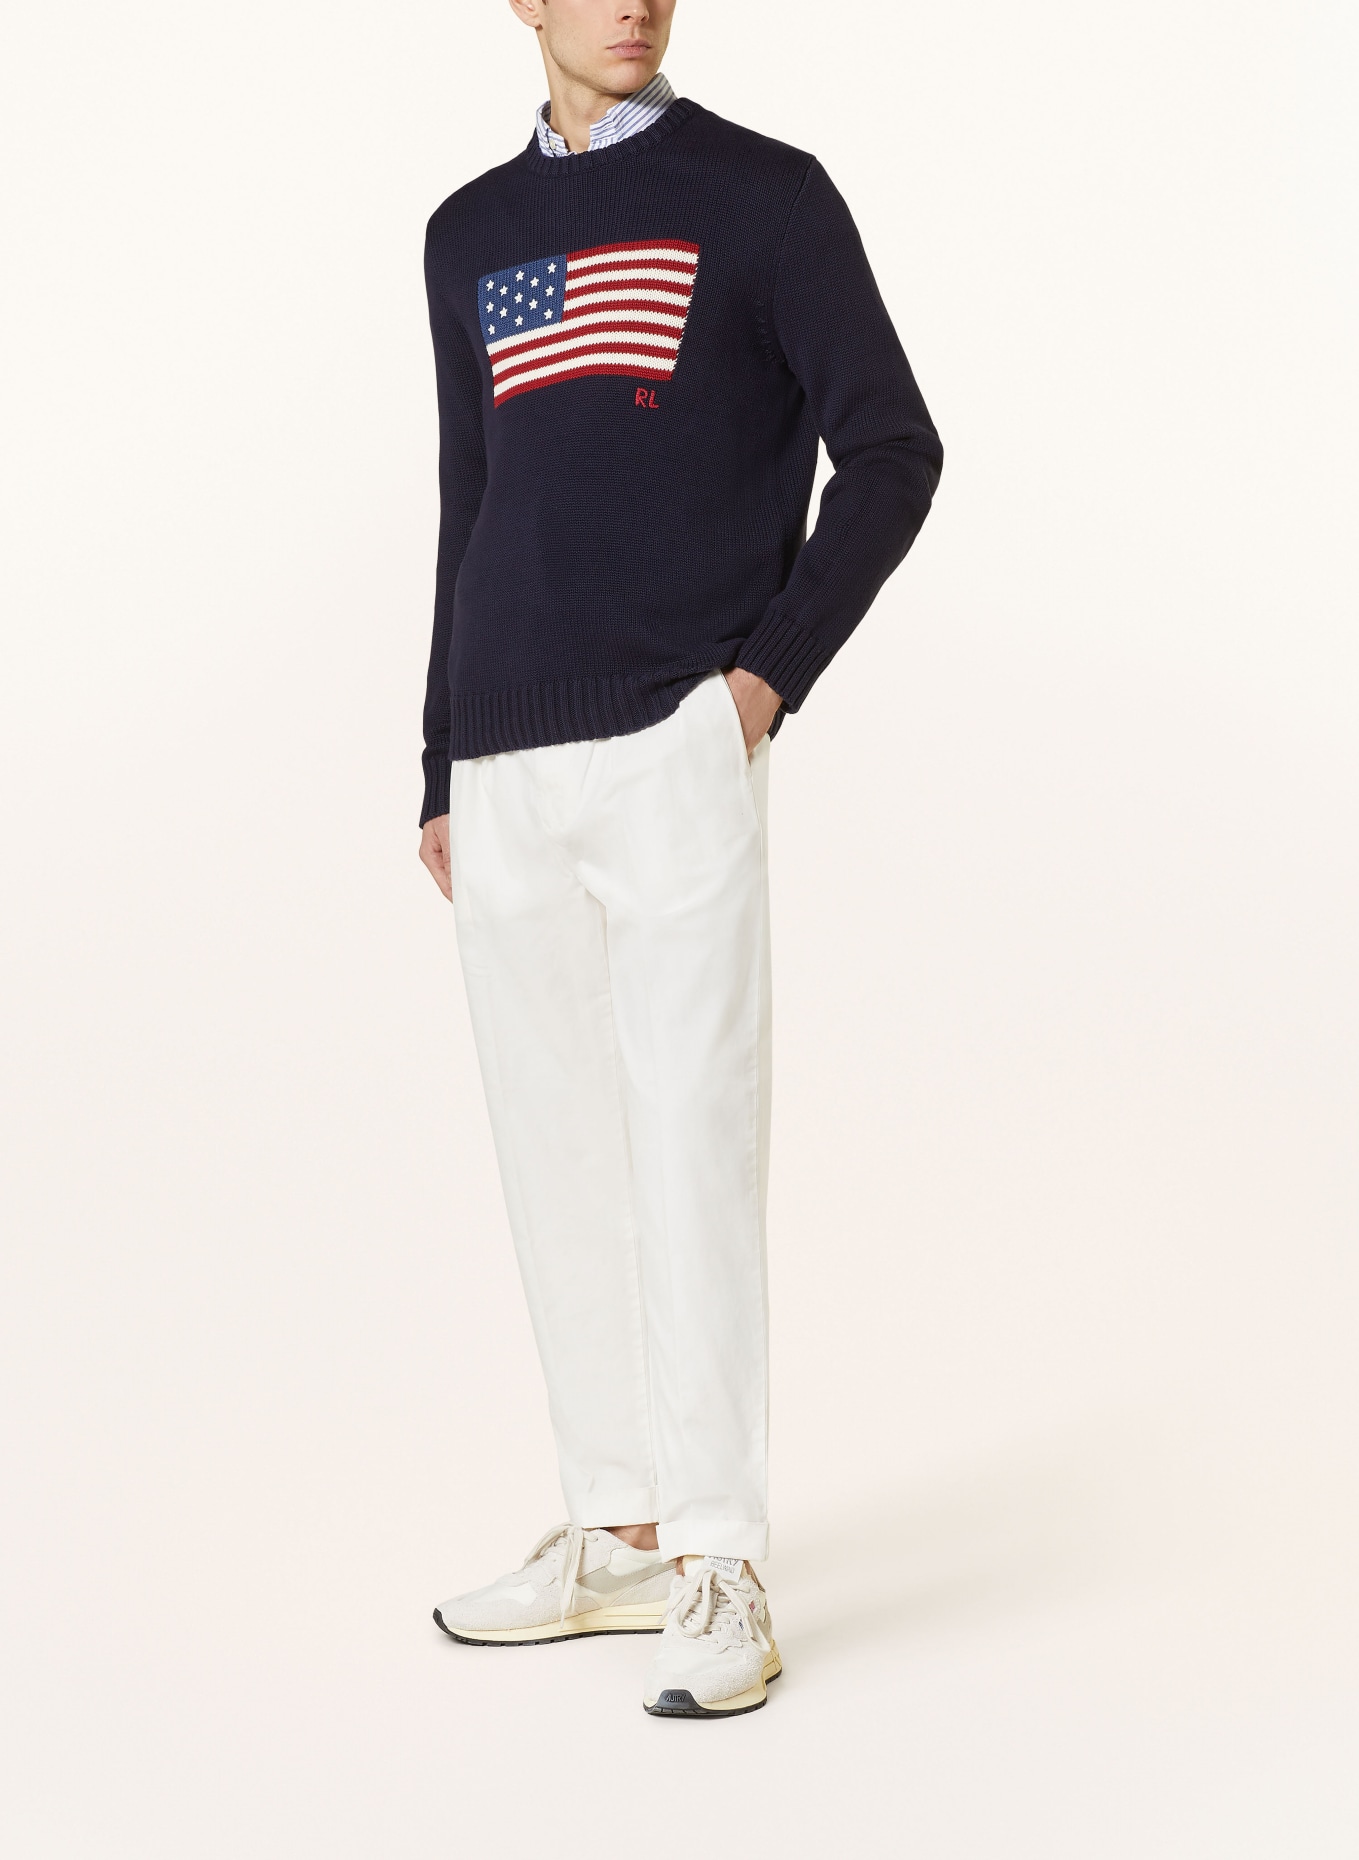 POLO RALPH LAUREN Sweater , Color: DARK BLUE/ RED/ WHITE (Image 2)